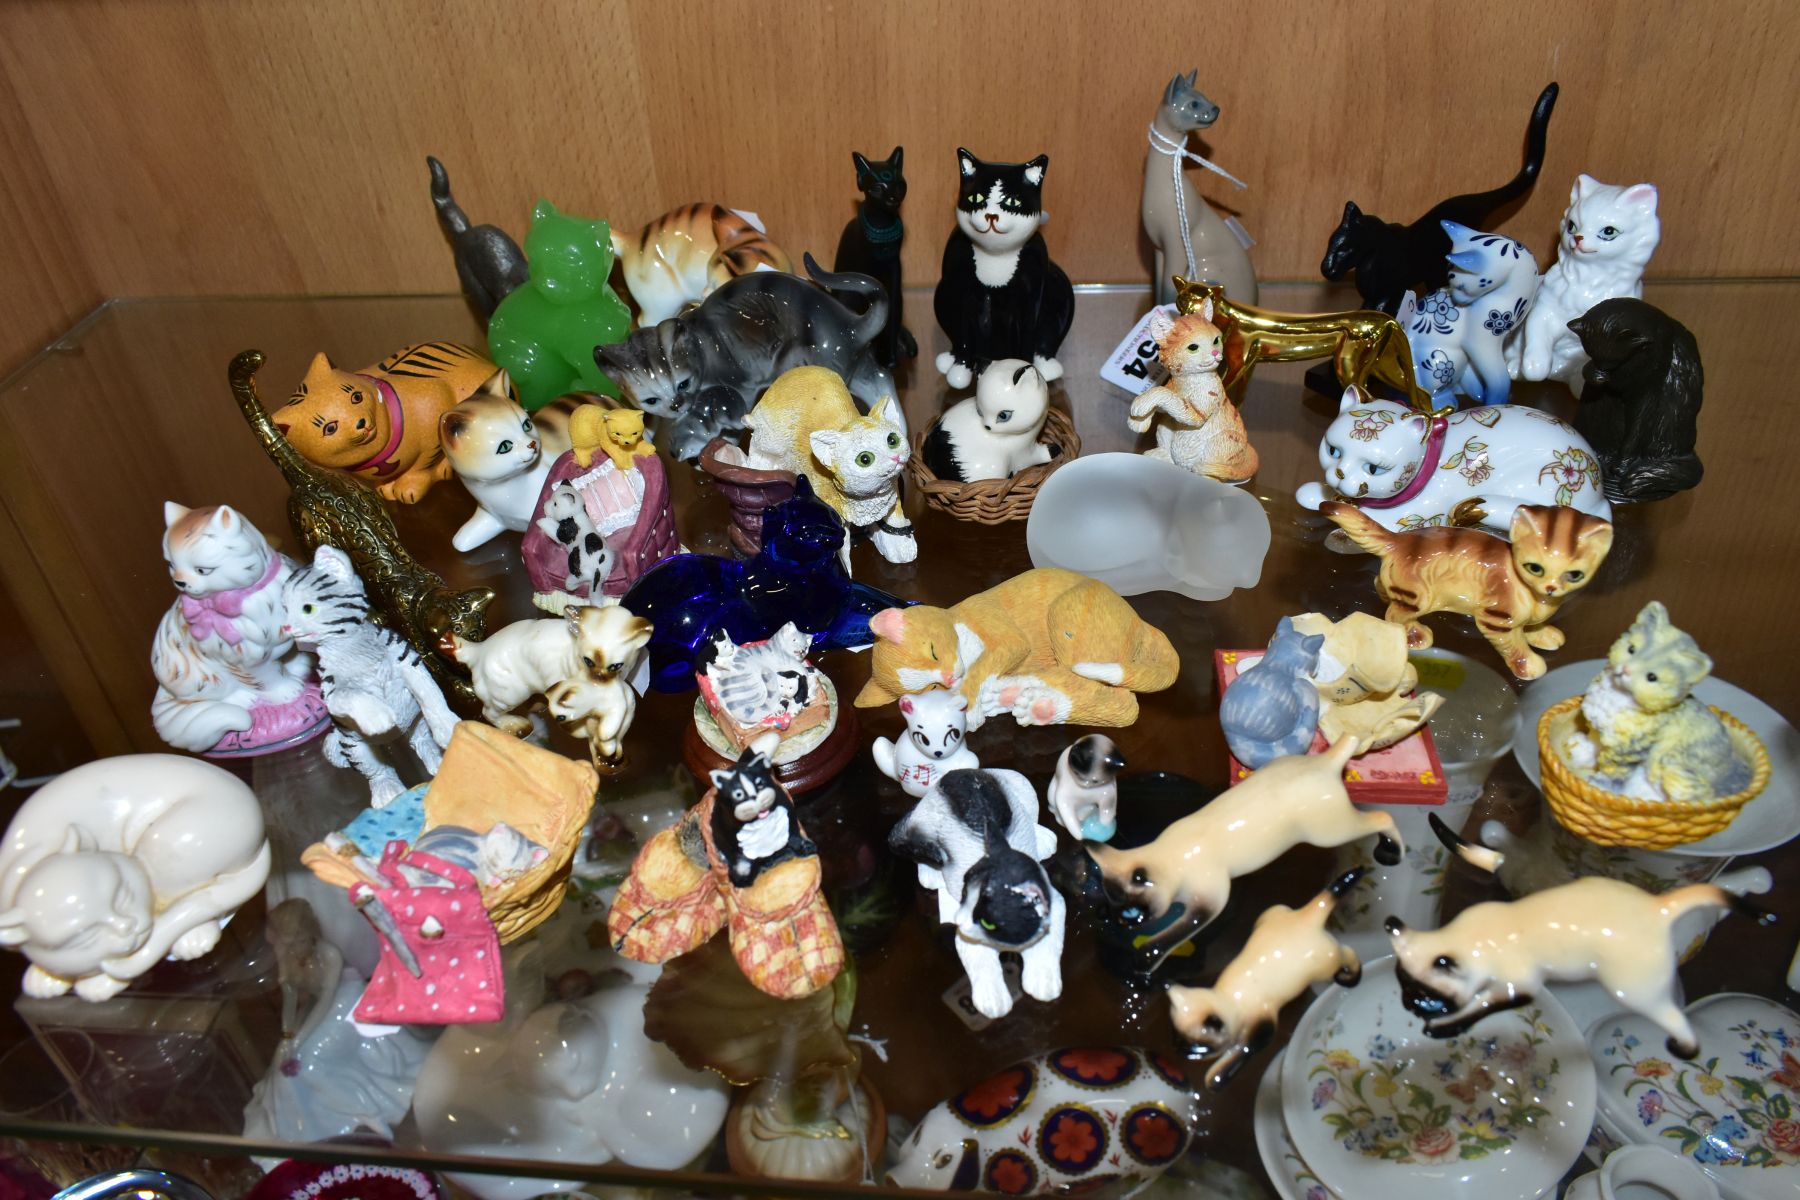 A COLLECTION OF OVER THIRTY FIVE MINIATURE CAT FIGURES, mostly ceramic and resin, including Franklin